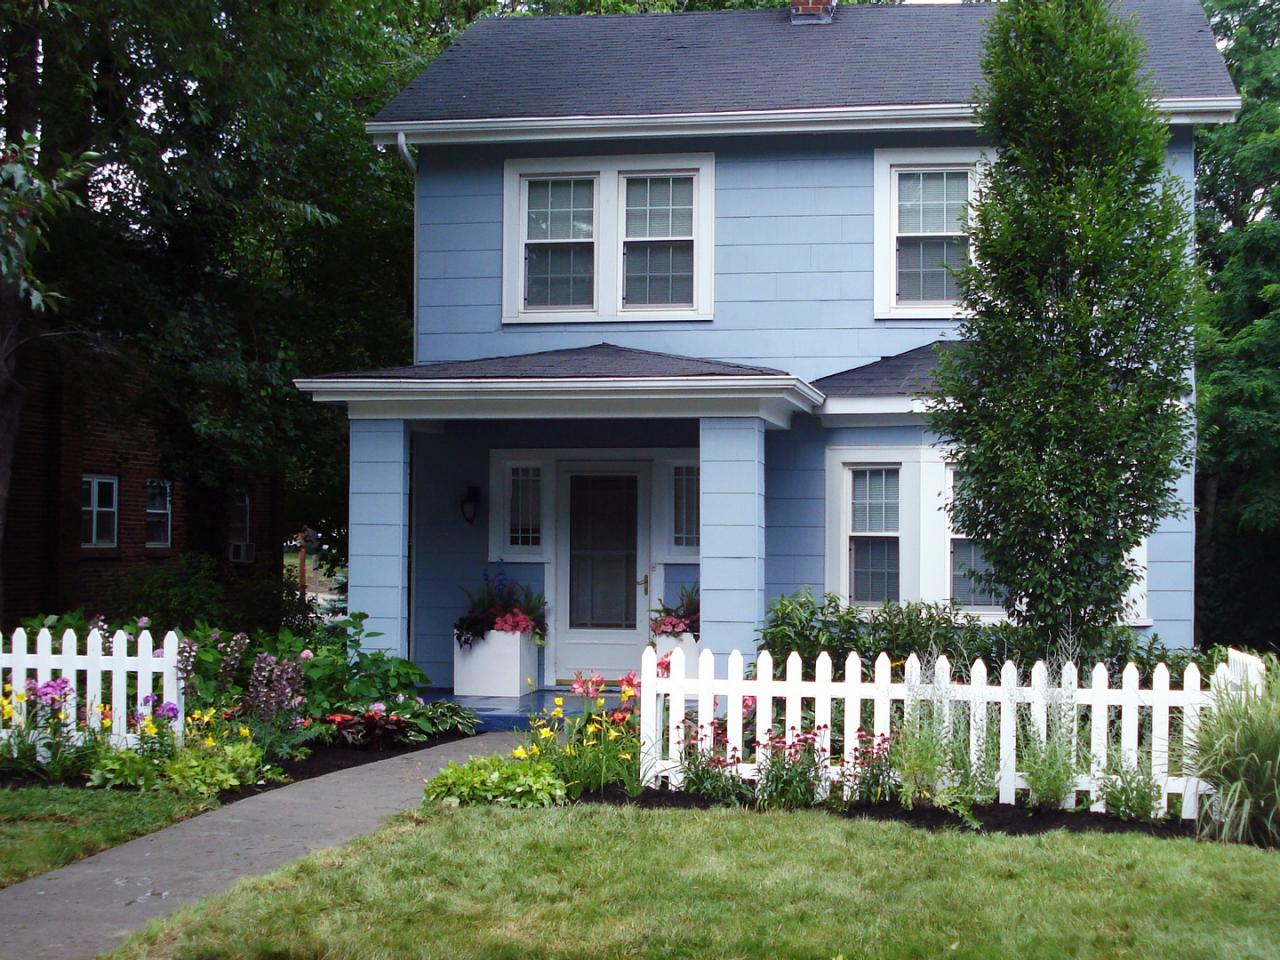 Landscape Makeover From Desperate Yard To Picket Pretty Curb Appeal